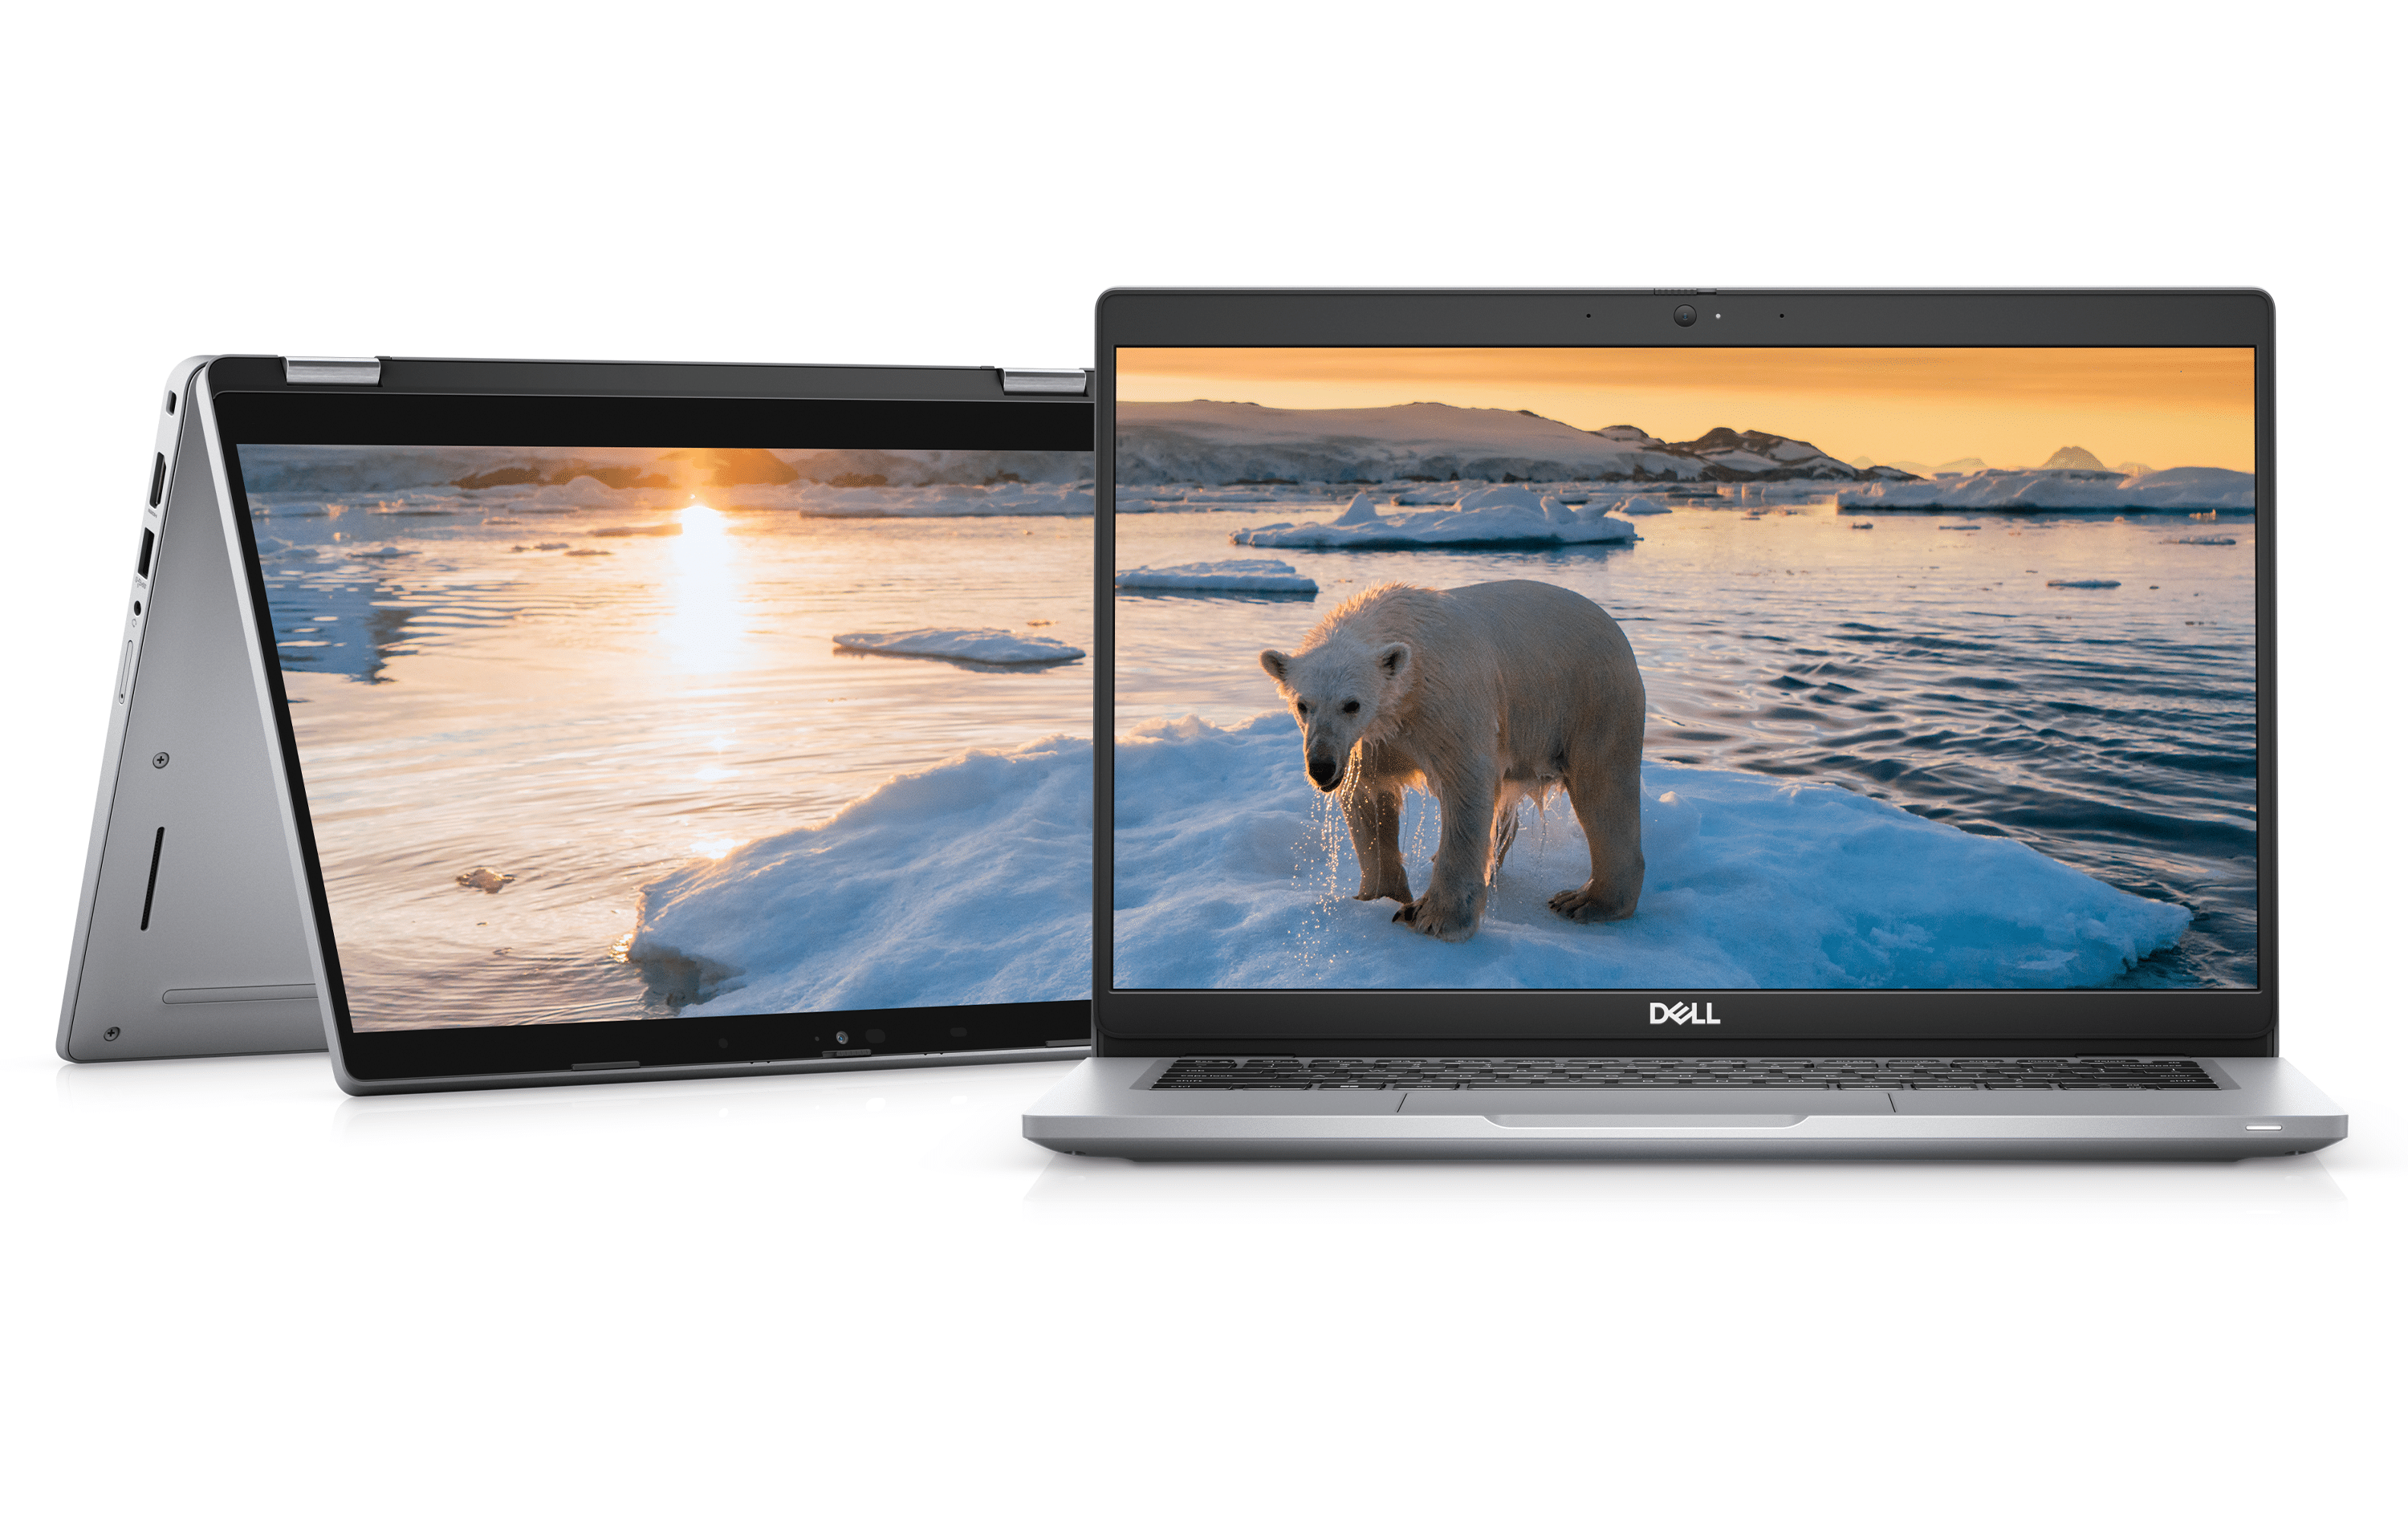 Dell Latitude 9430 and more: Manufacturer introduces 9 new Latitude  notebooks